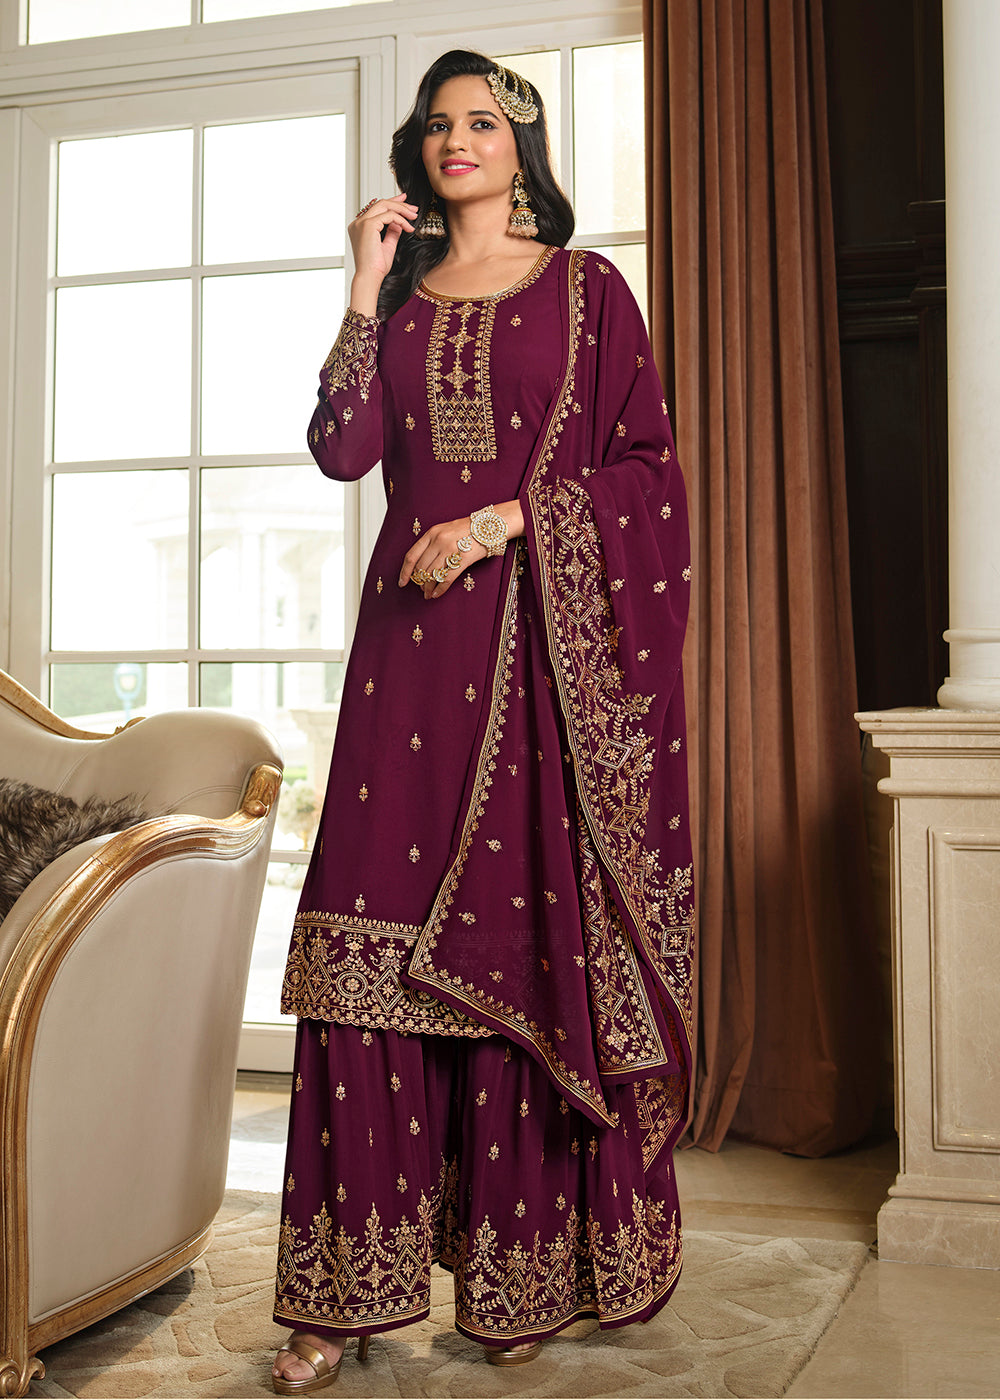 Shop Now Lovely Plum Wine Embroidered Georgette Pakistani Gharara Suit Online at Empress Clothing in USA, UK, Canada, Germany & Worldwide.